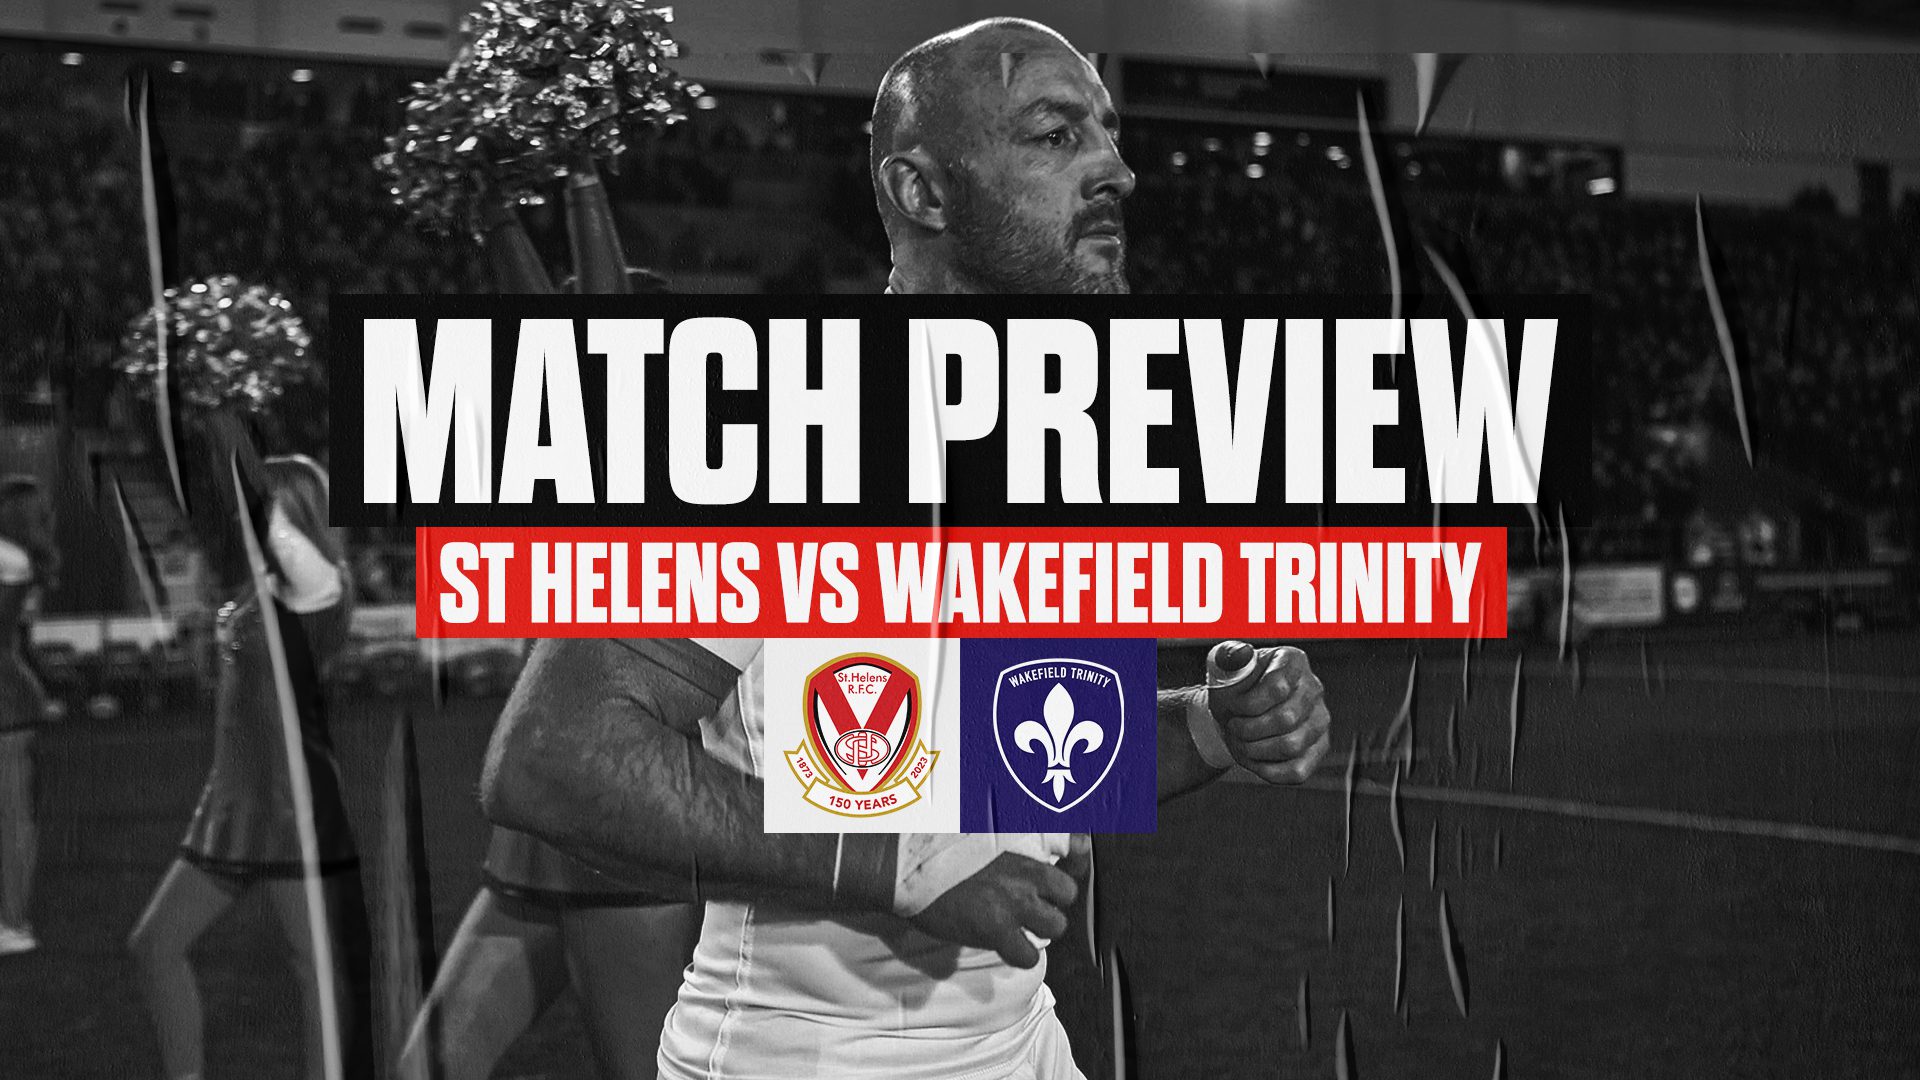 Match Preview Wakefield Trinity (H) St.Helens R.F.C.